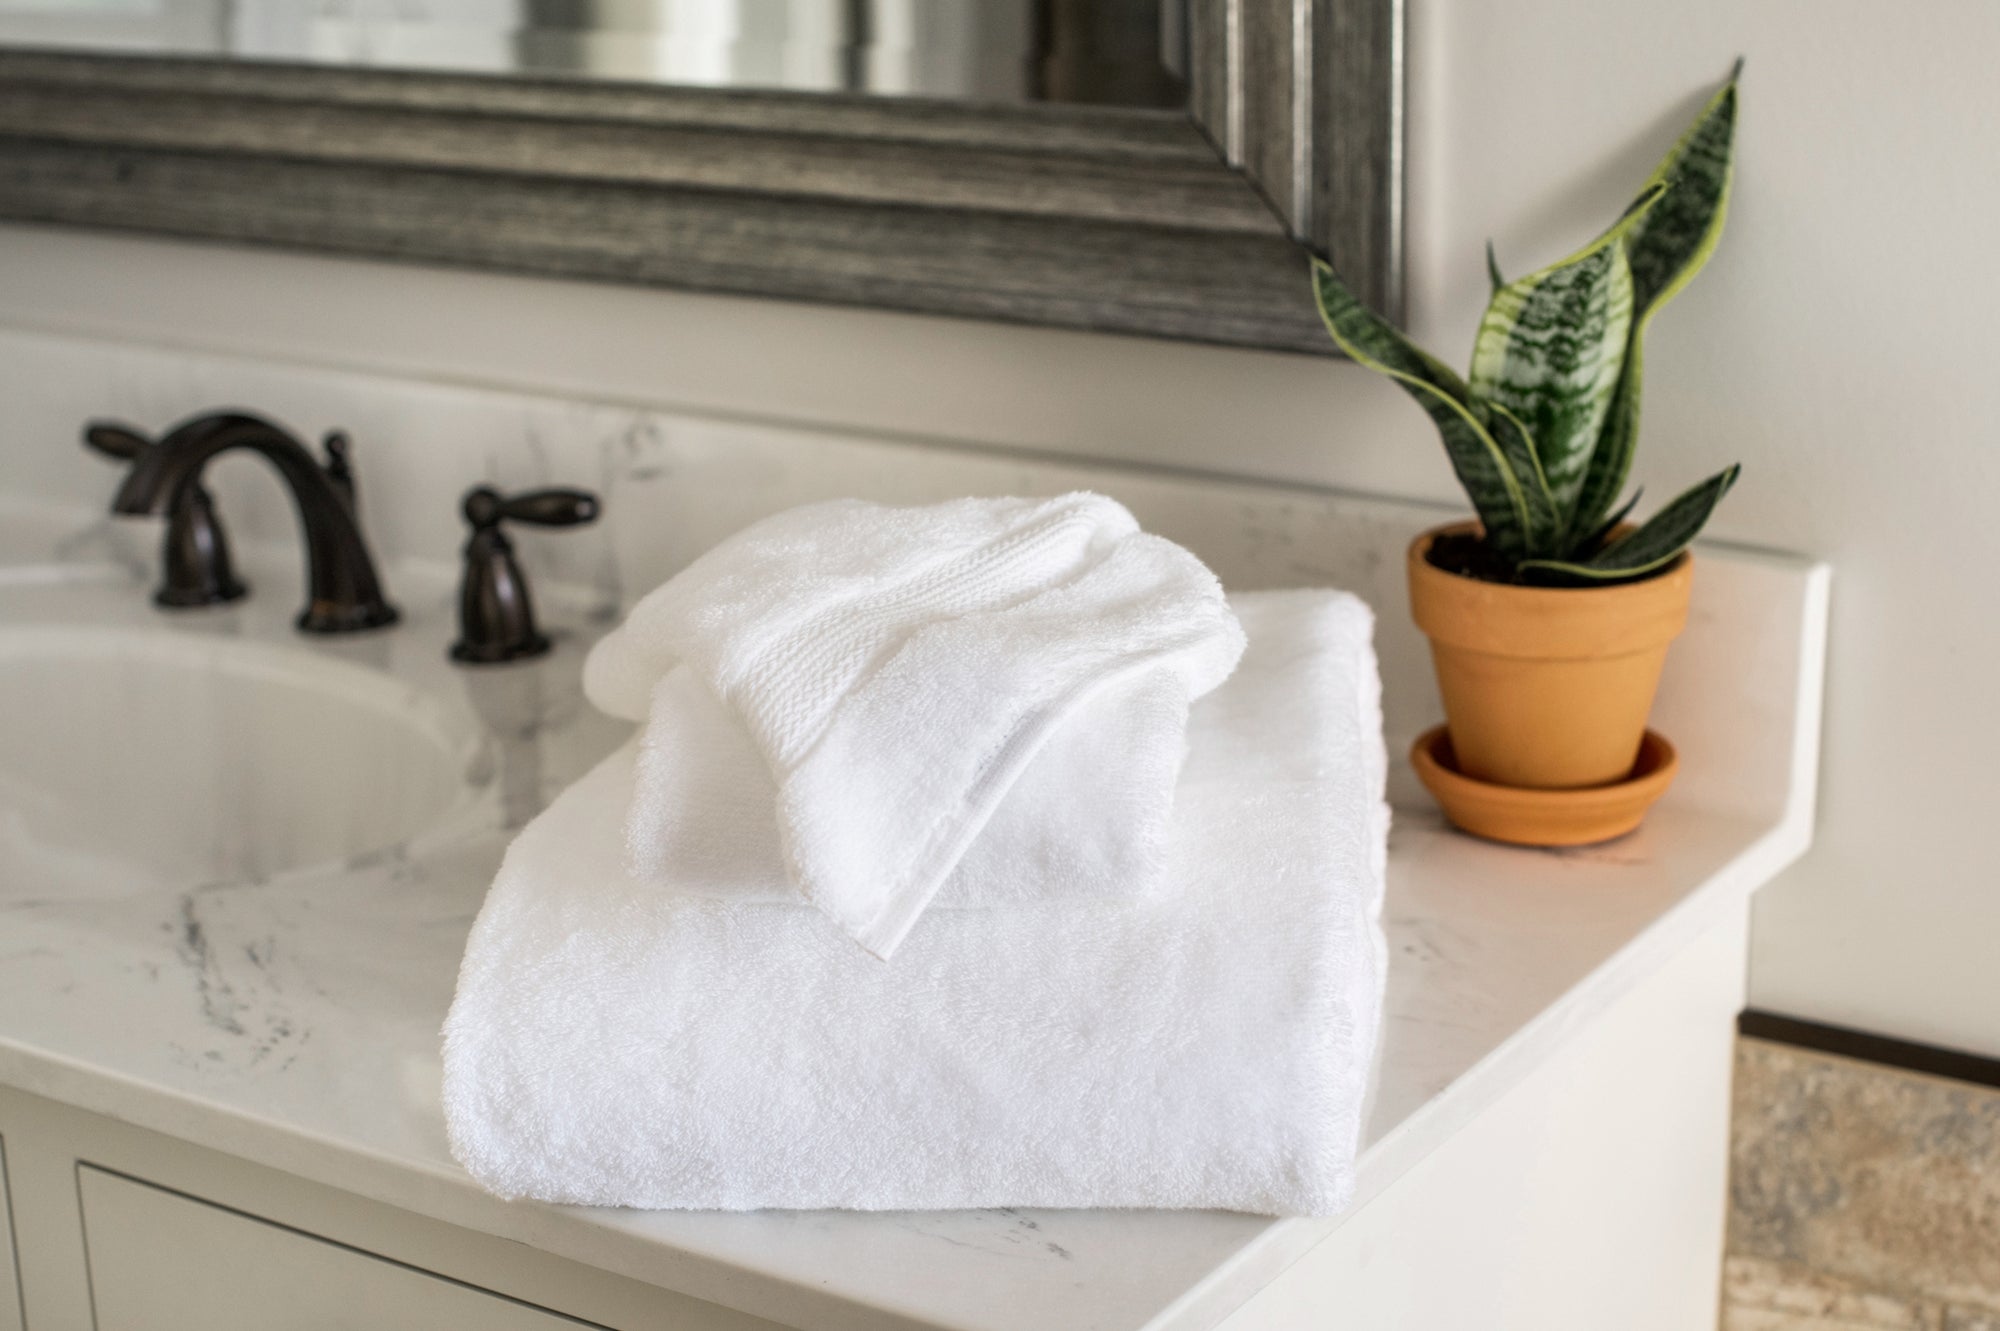 How to buy towels - Towel Buying Guide 2021